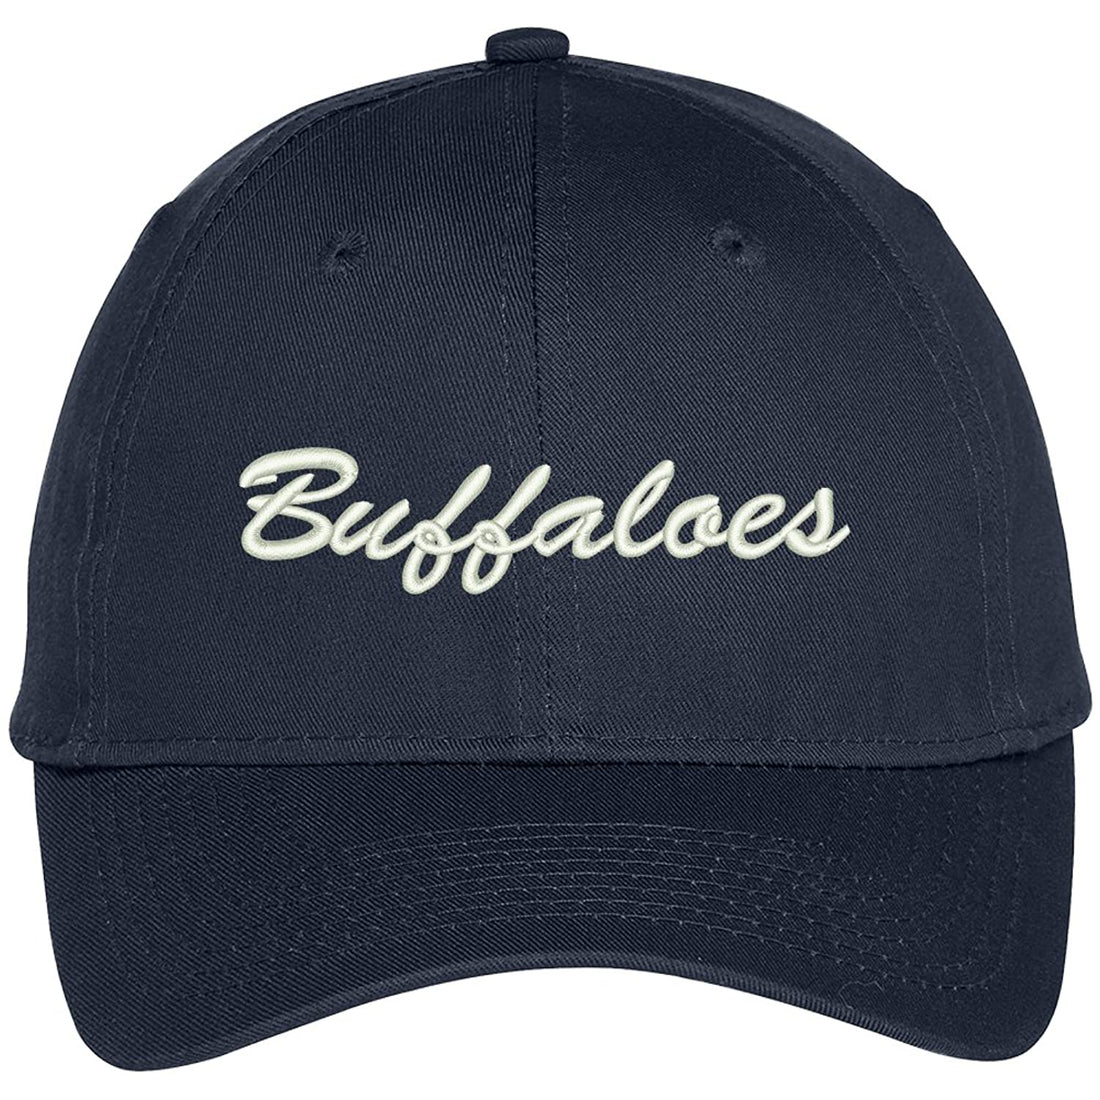 Trendy Apparel Shop Buffaloes Embroidered Team Nickname Mascot Cap